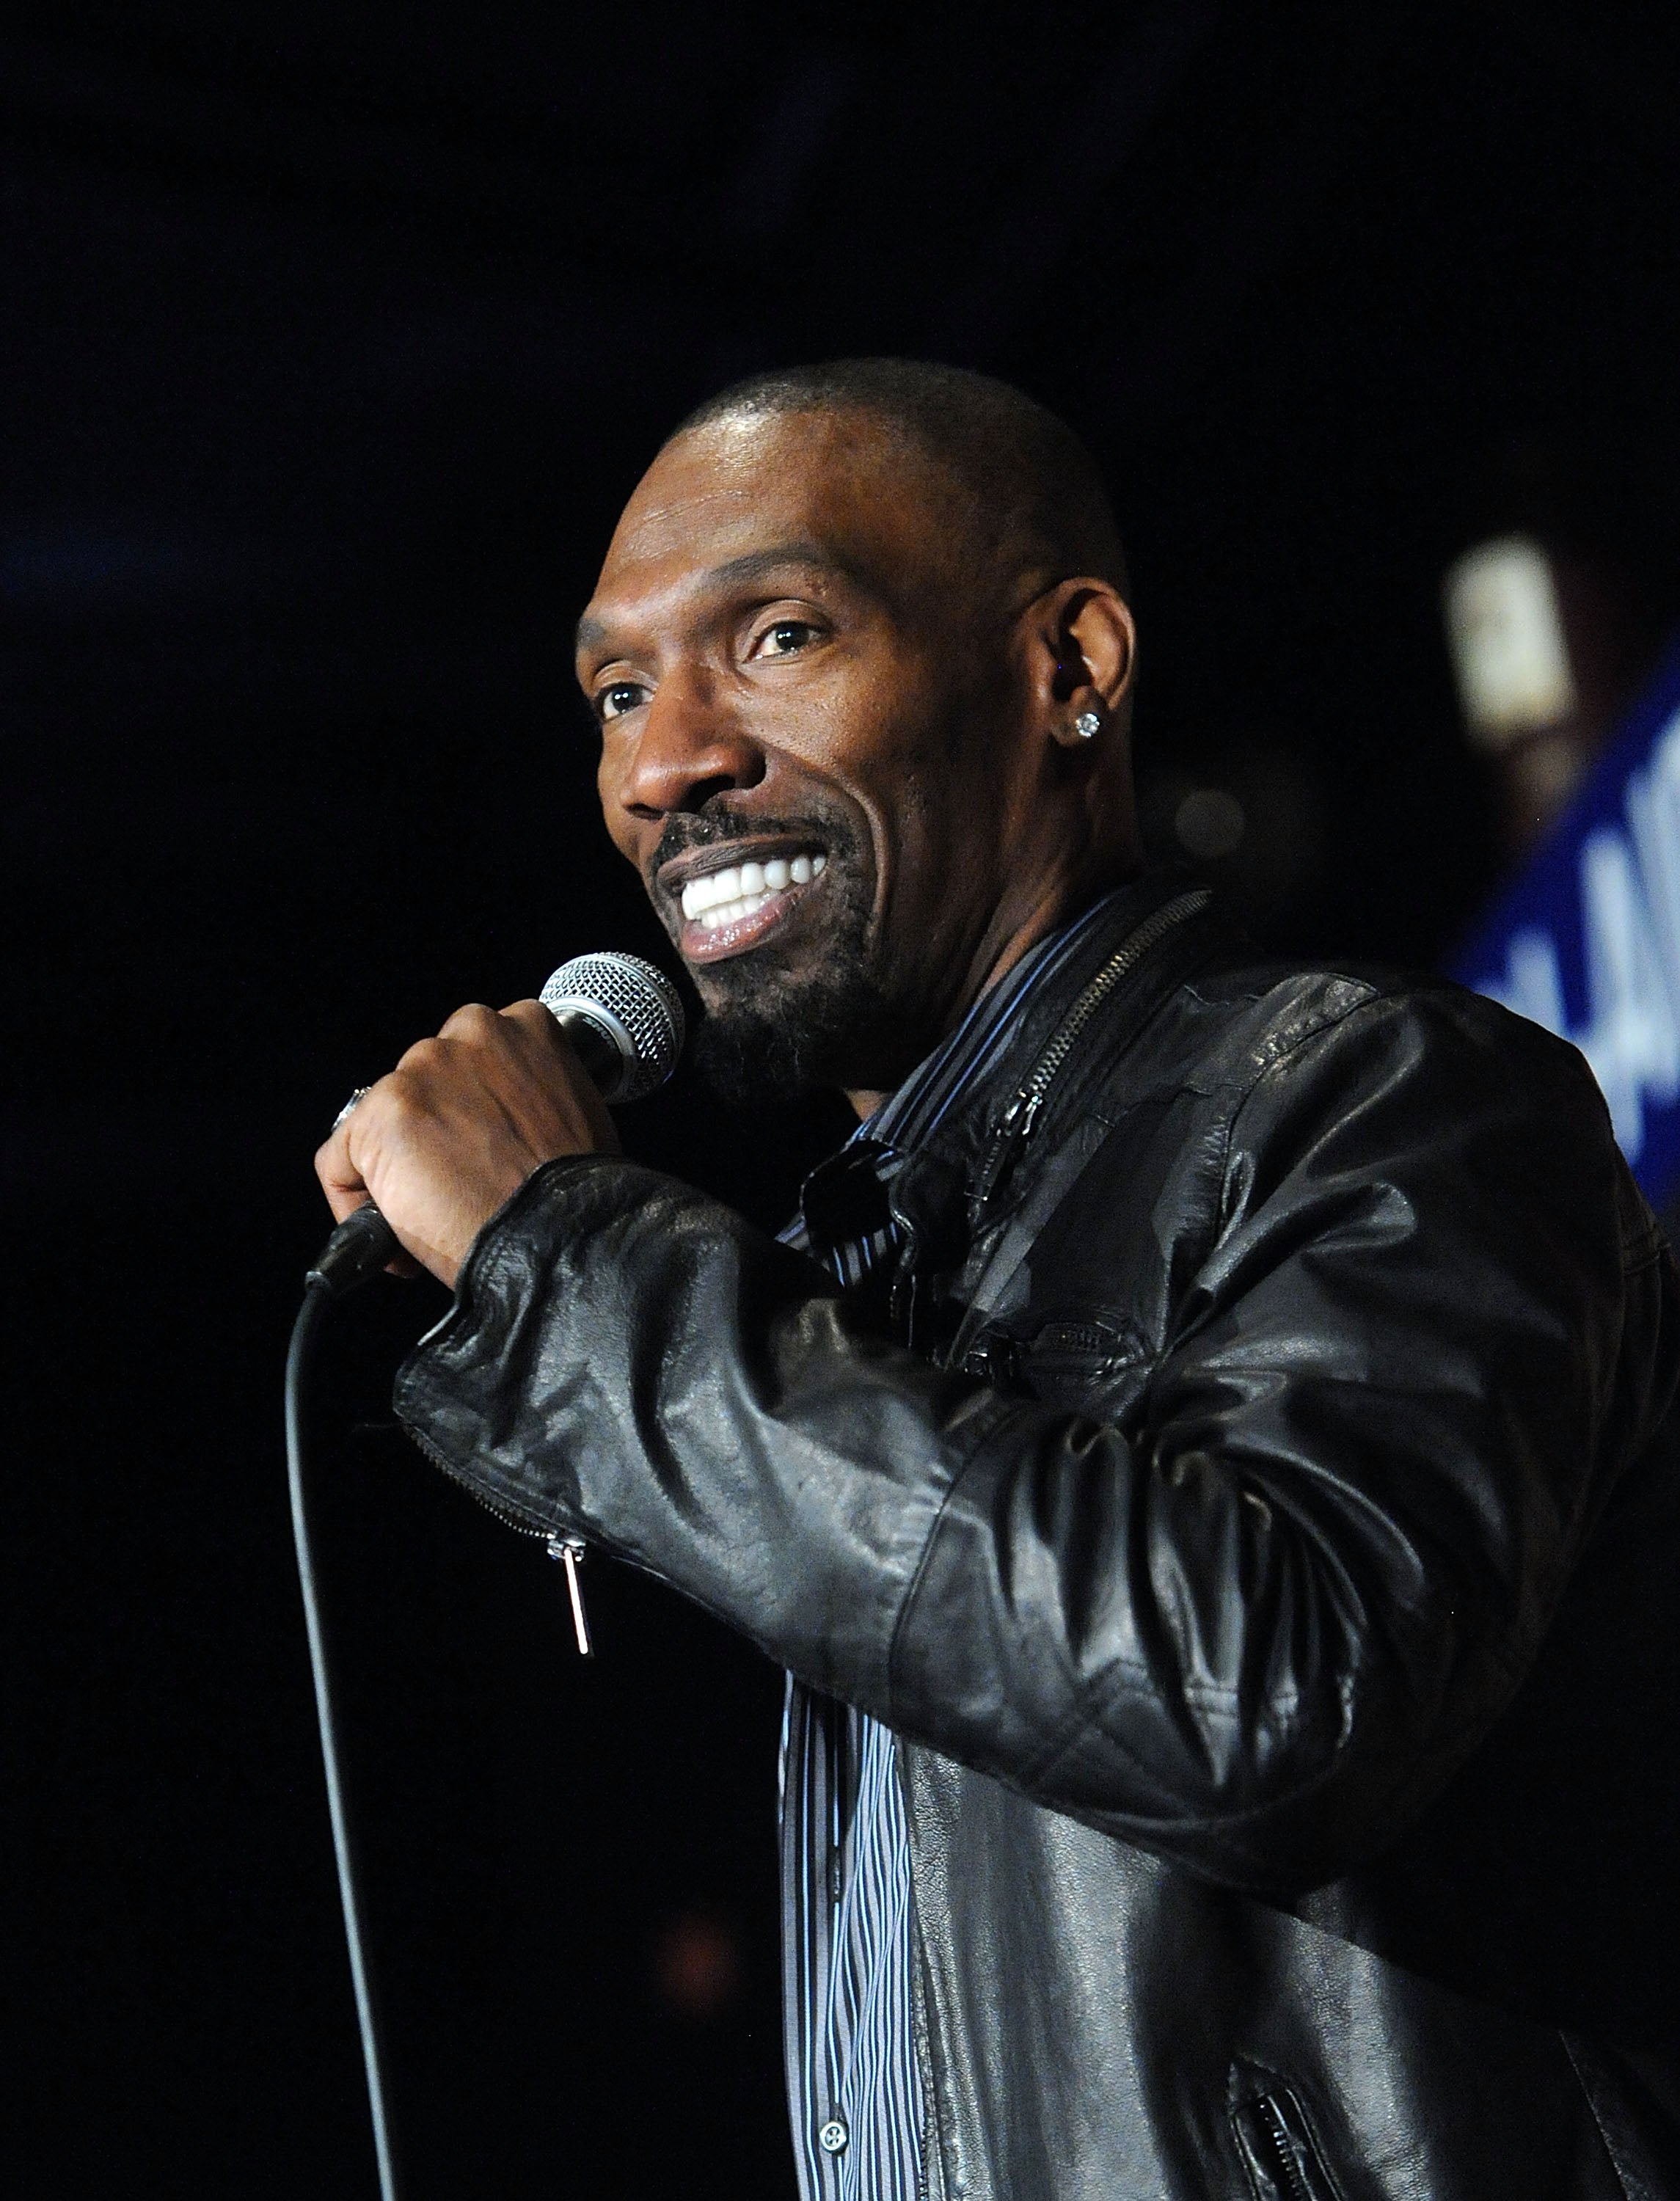 Charlie Murphy Dead At 57
